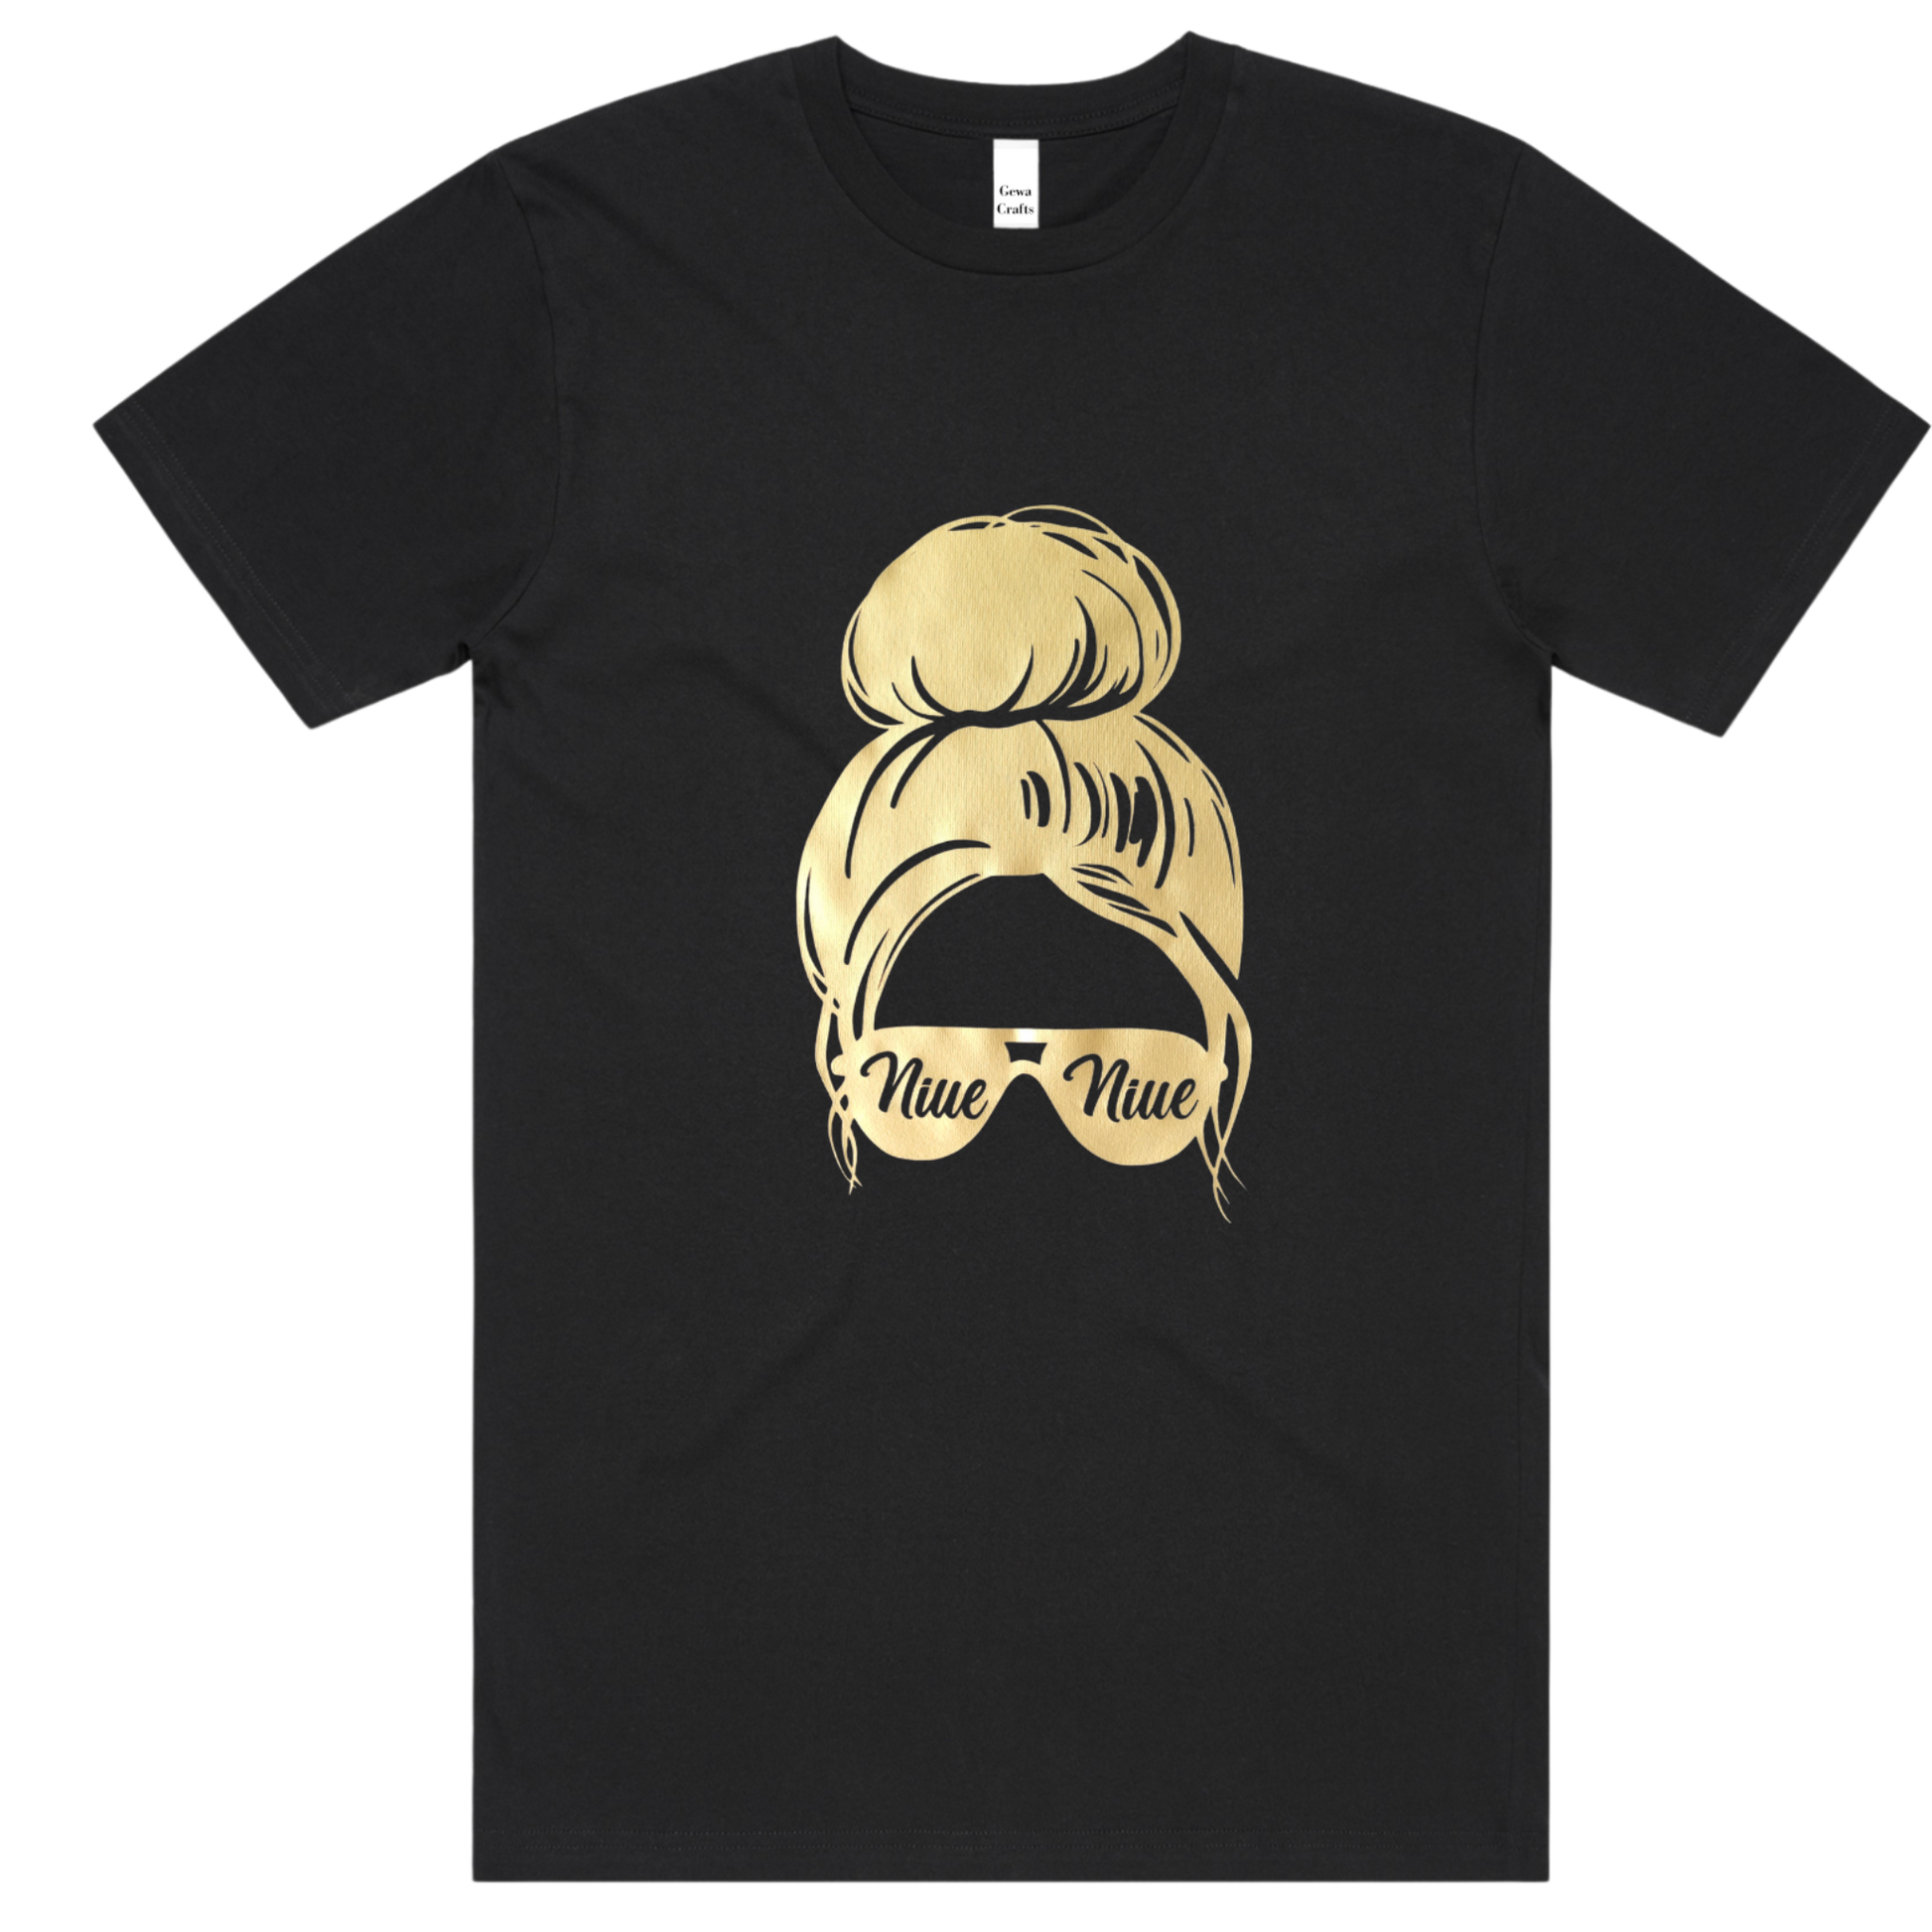 Island Chic black t-shirt. gold vinyl design of a lady wearing sunglasses that say Niue on them. Her hair in a messy bun. 